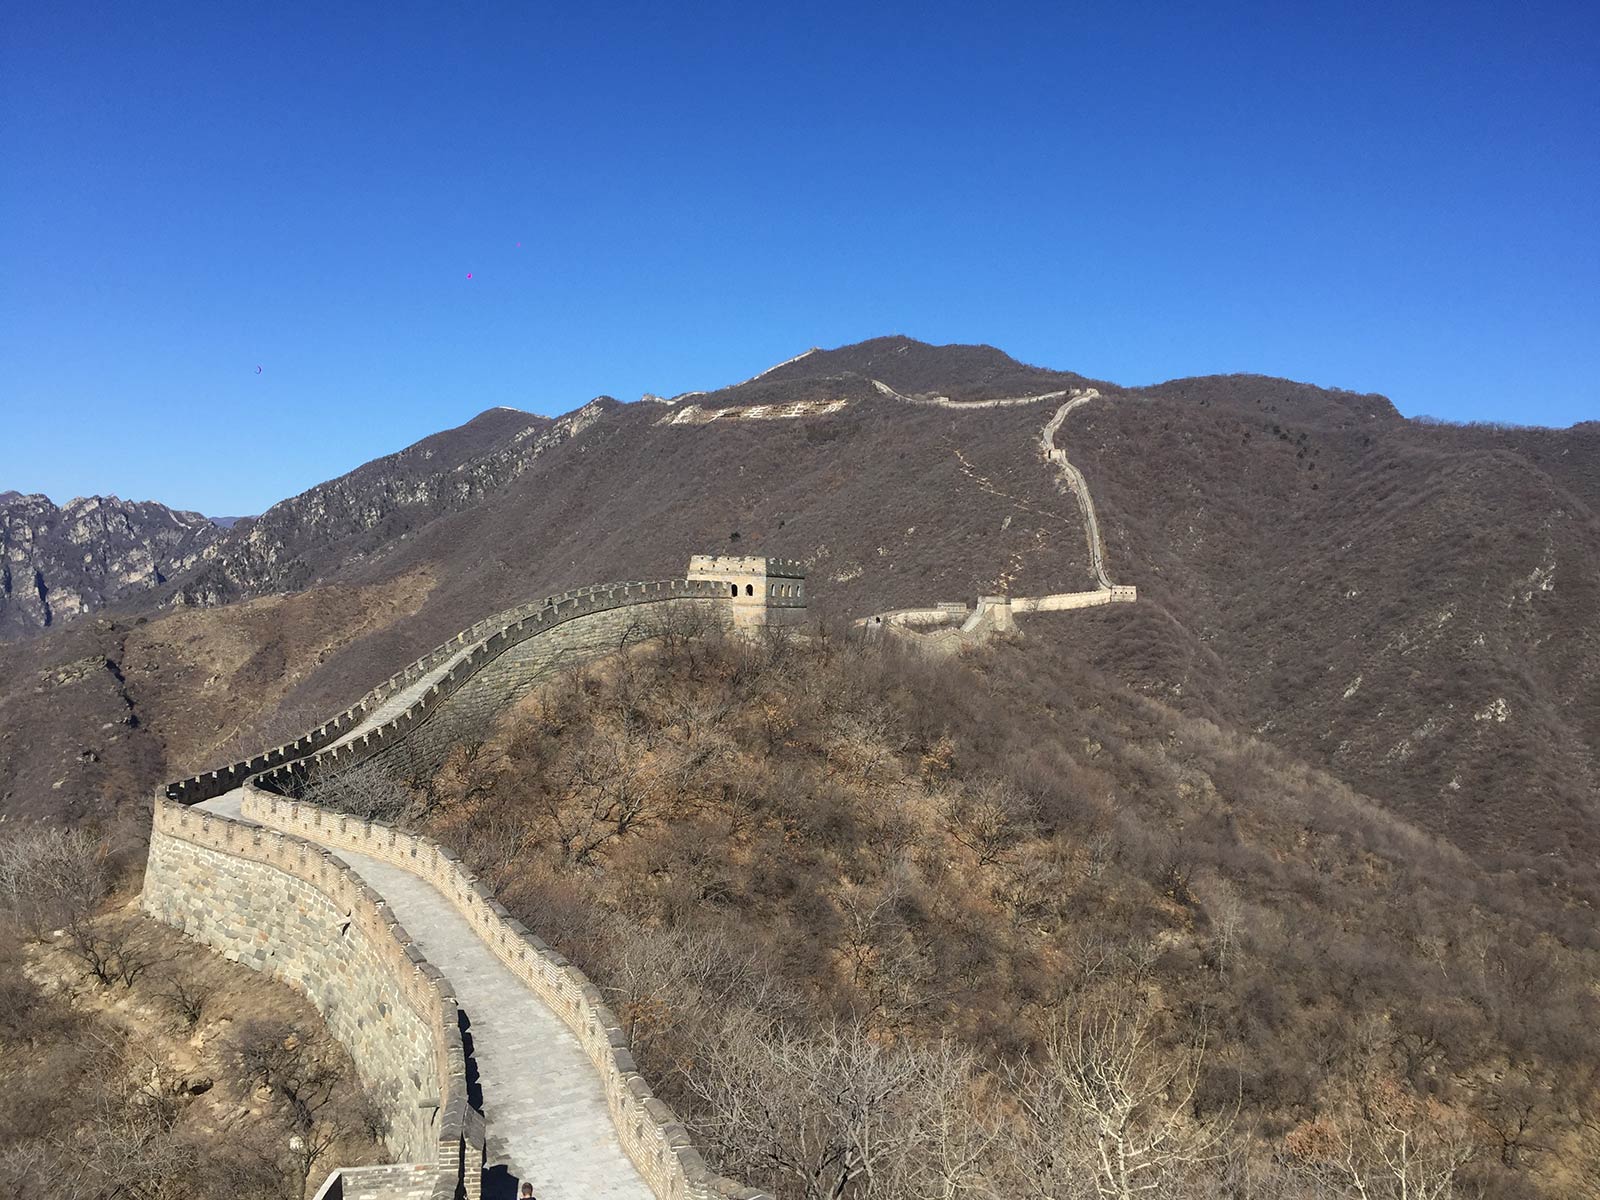 Restored part of The Great Wall of China in Beijing, China. The Great Wall of China